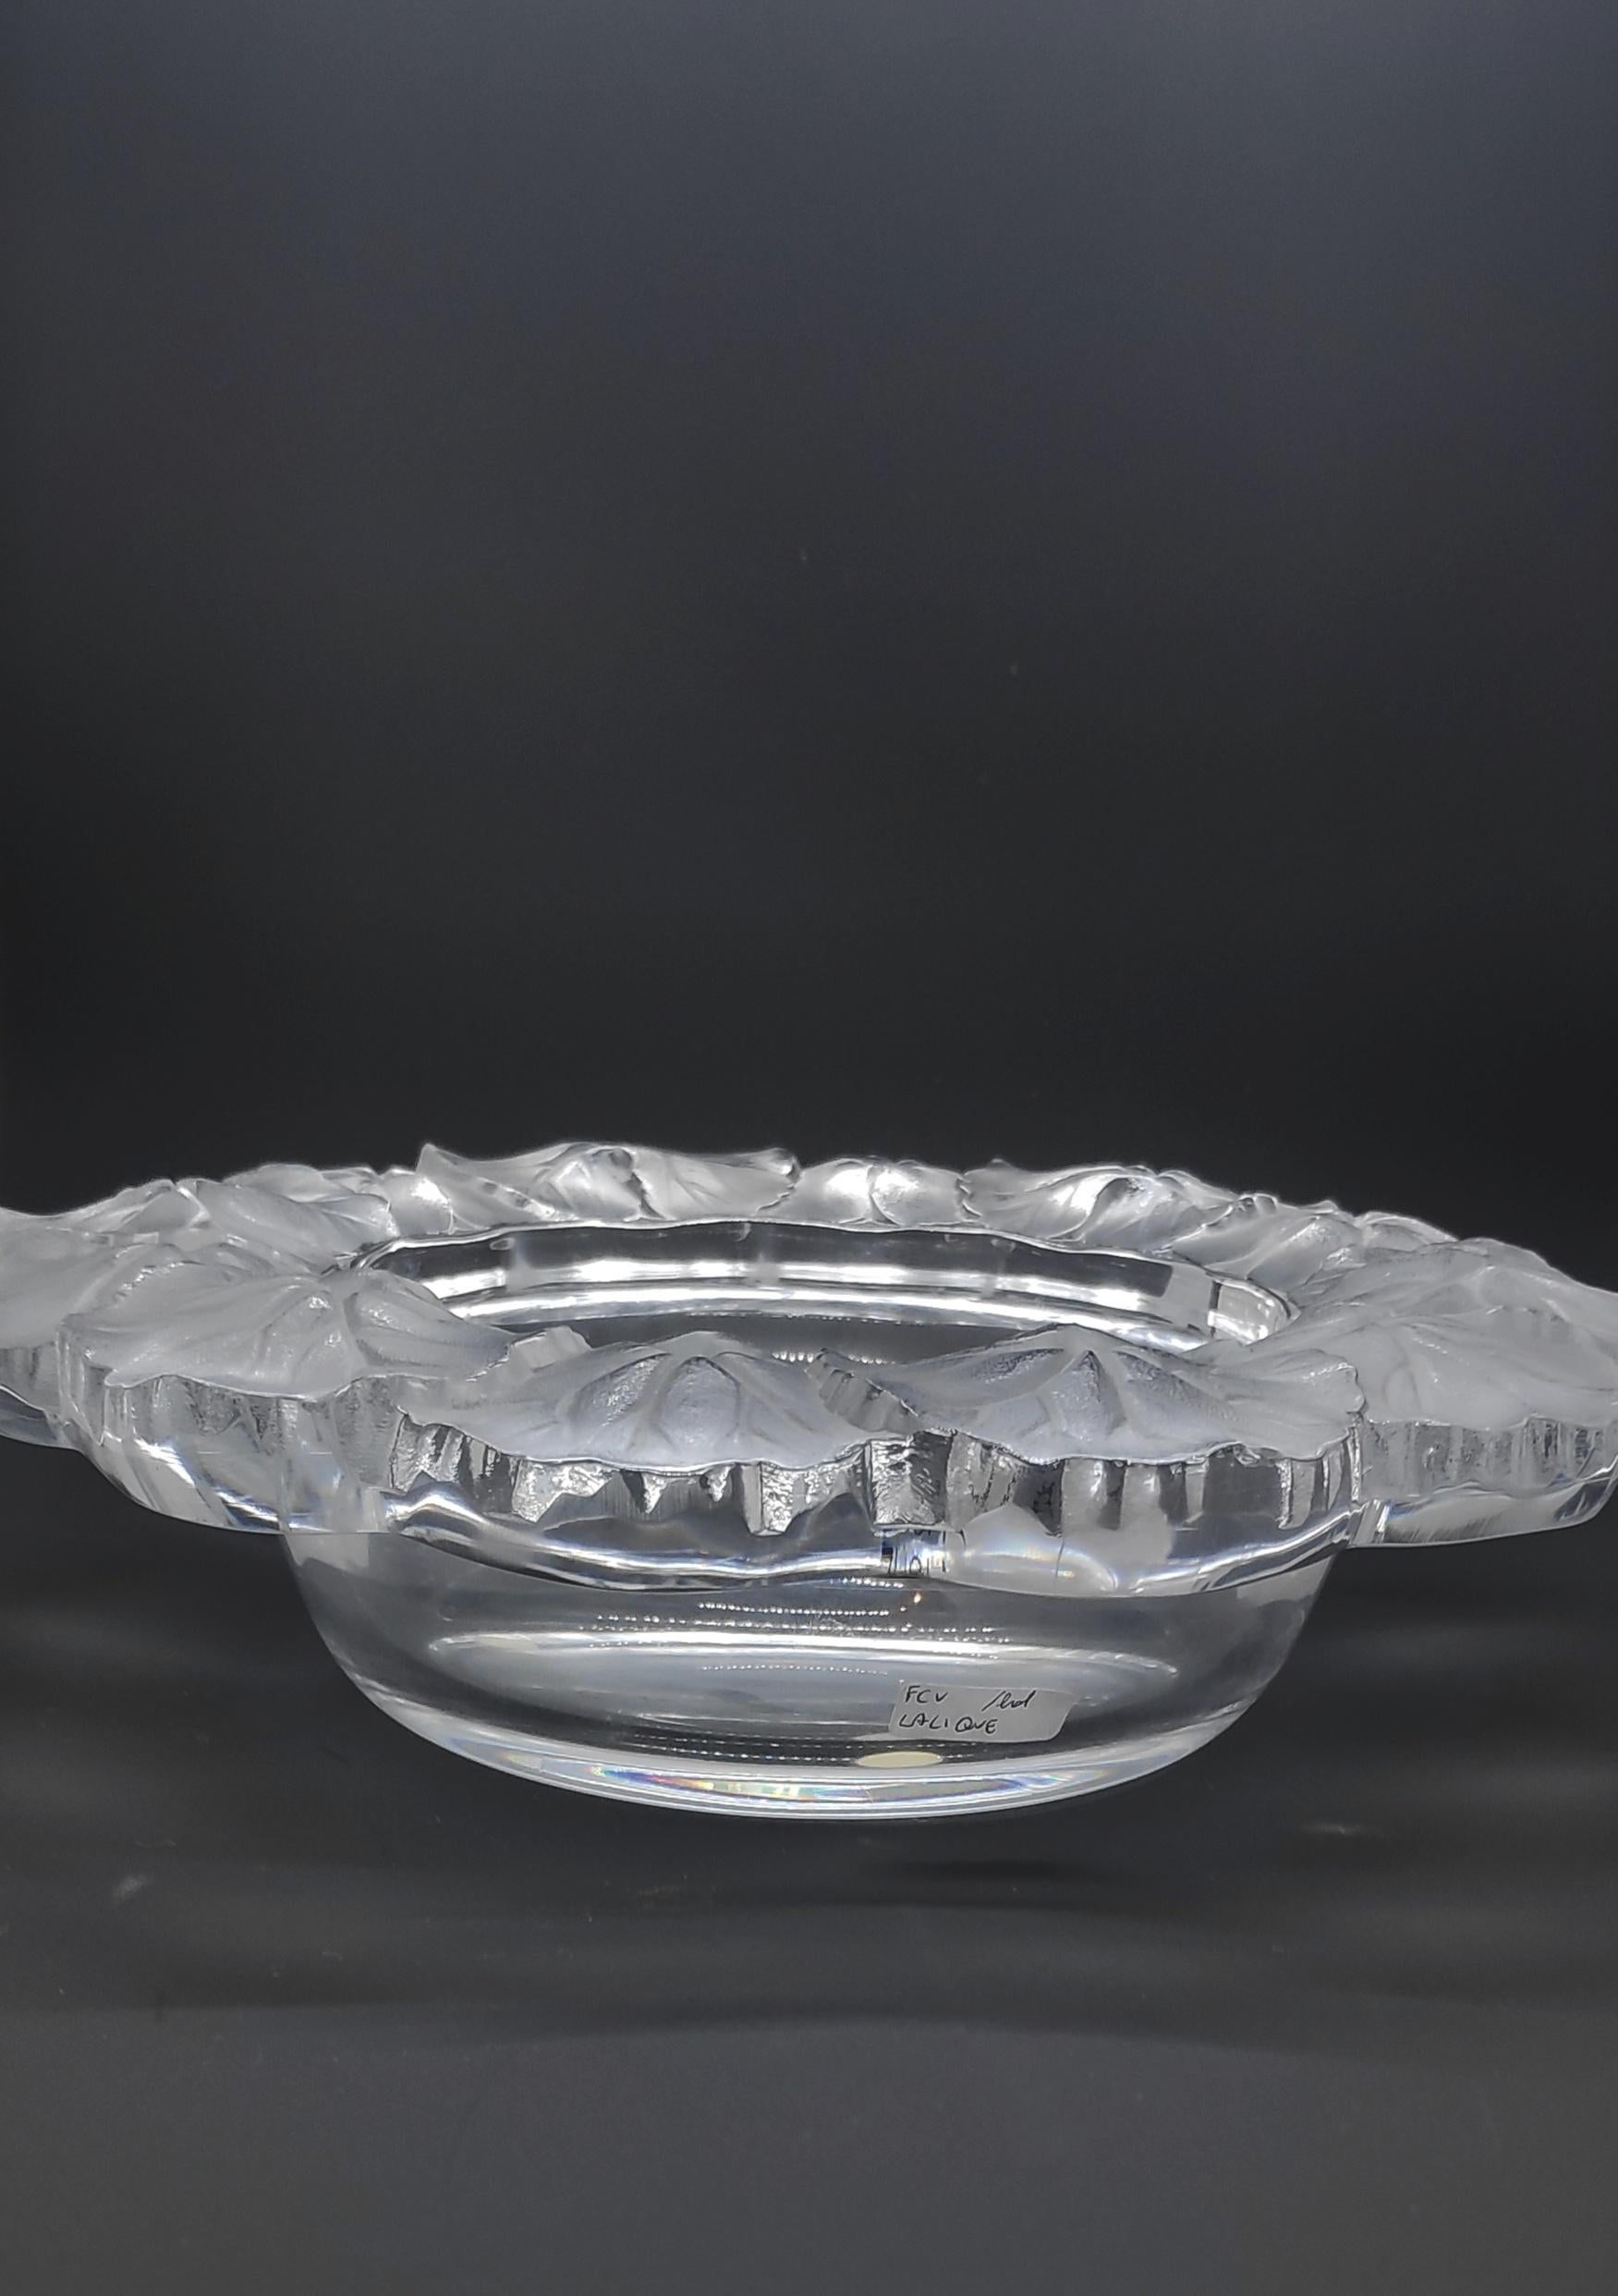 We can be said that René Lalique products are among the most coveted collector's items today. Their opulence, brilliance and voluptuousness distinguish them from any other modern glass creation of the first half of the 20th century.
Measures: